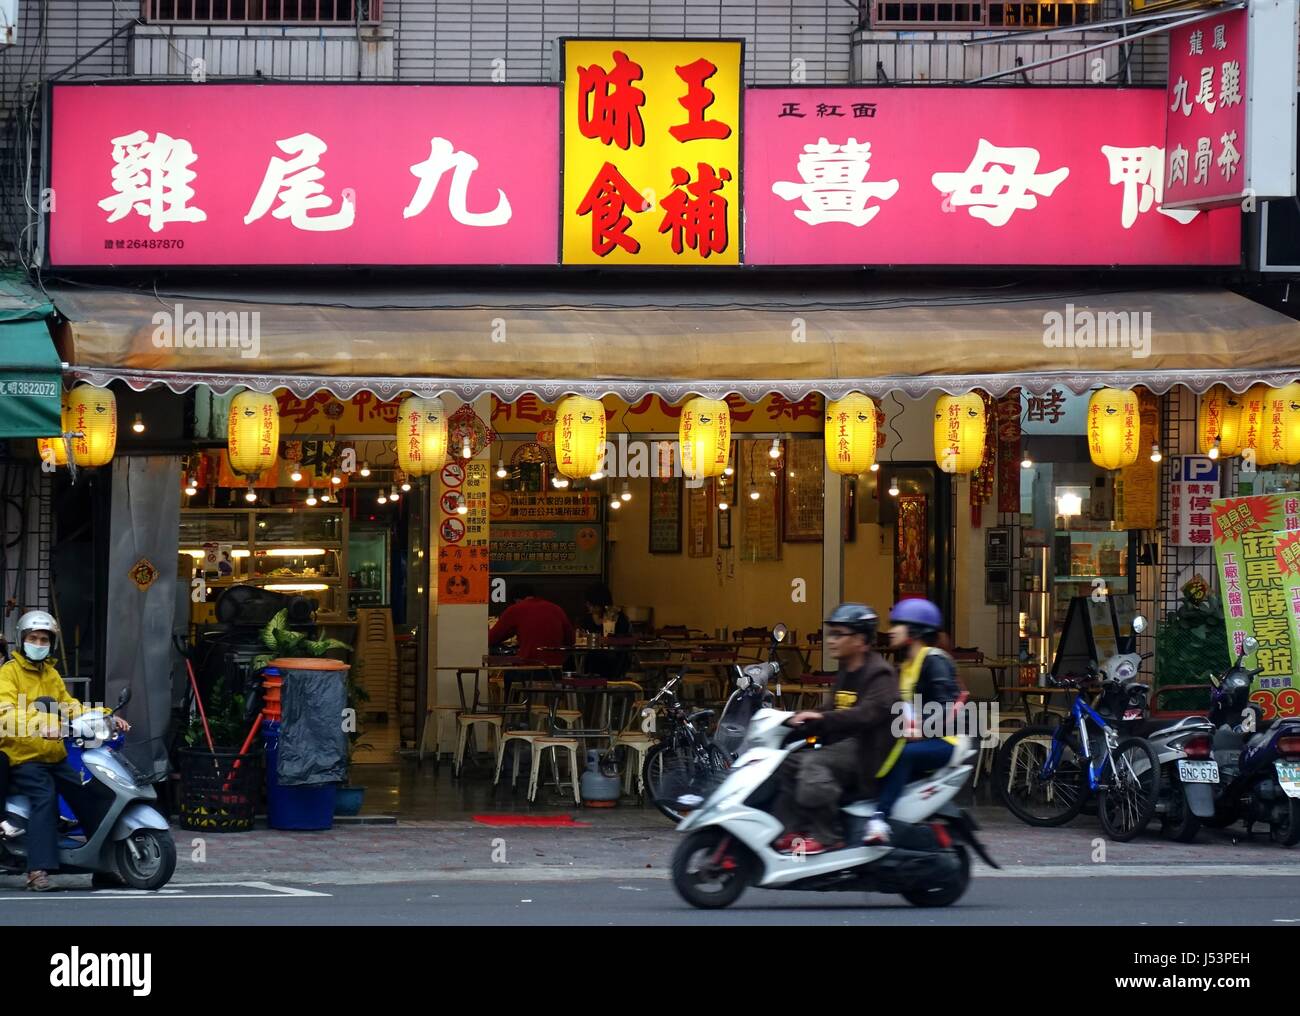 KAOHSIUNG, TAIWAN -- MARCH 8, 2014: A Chinese restaurant that serves traditional duck hot pot cooked with ginger, a popular winter food in Taiwan. Stock Photo